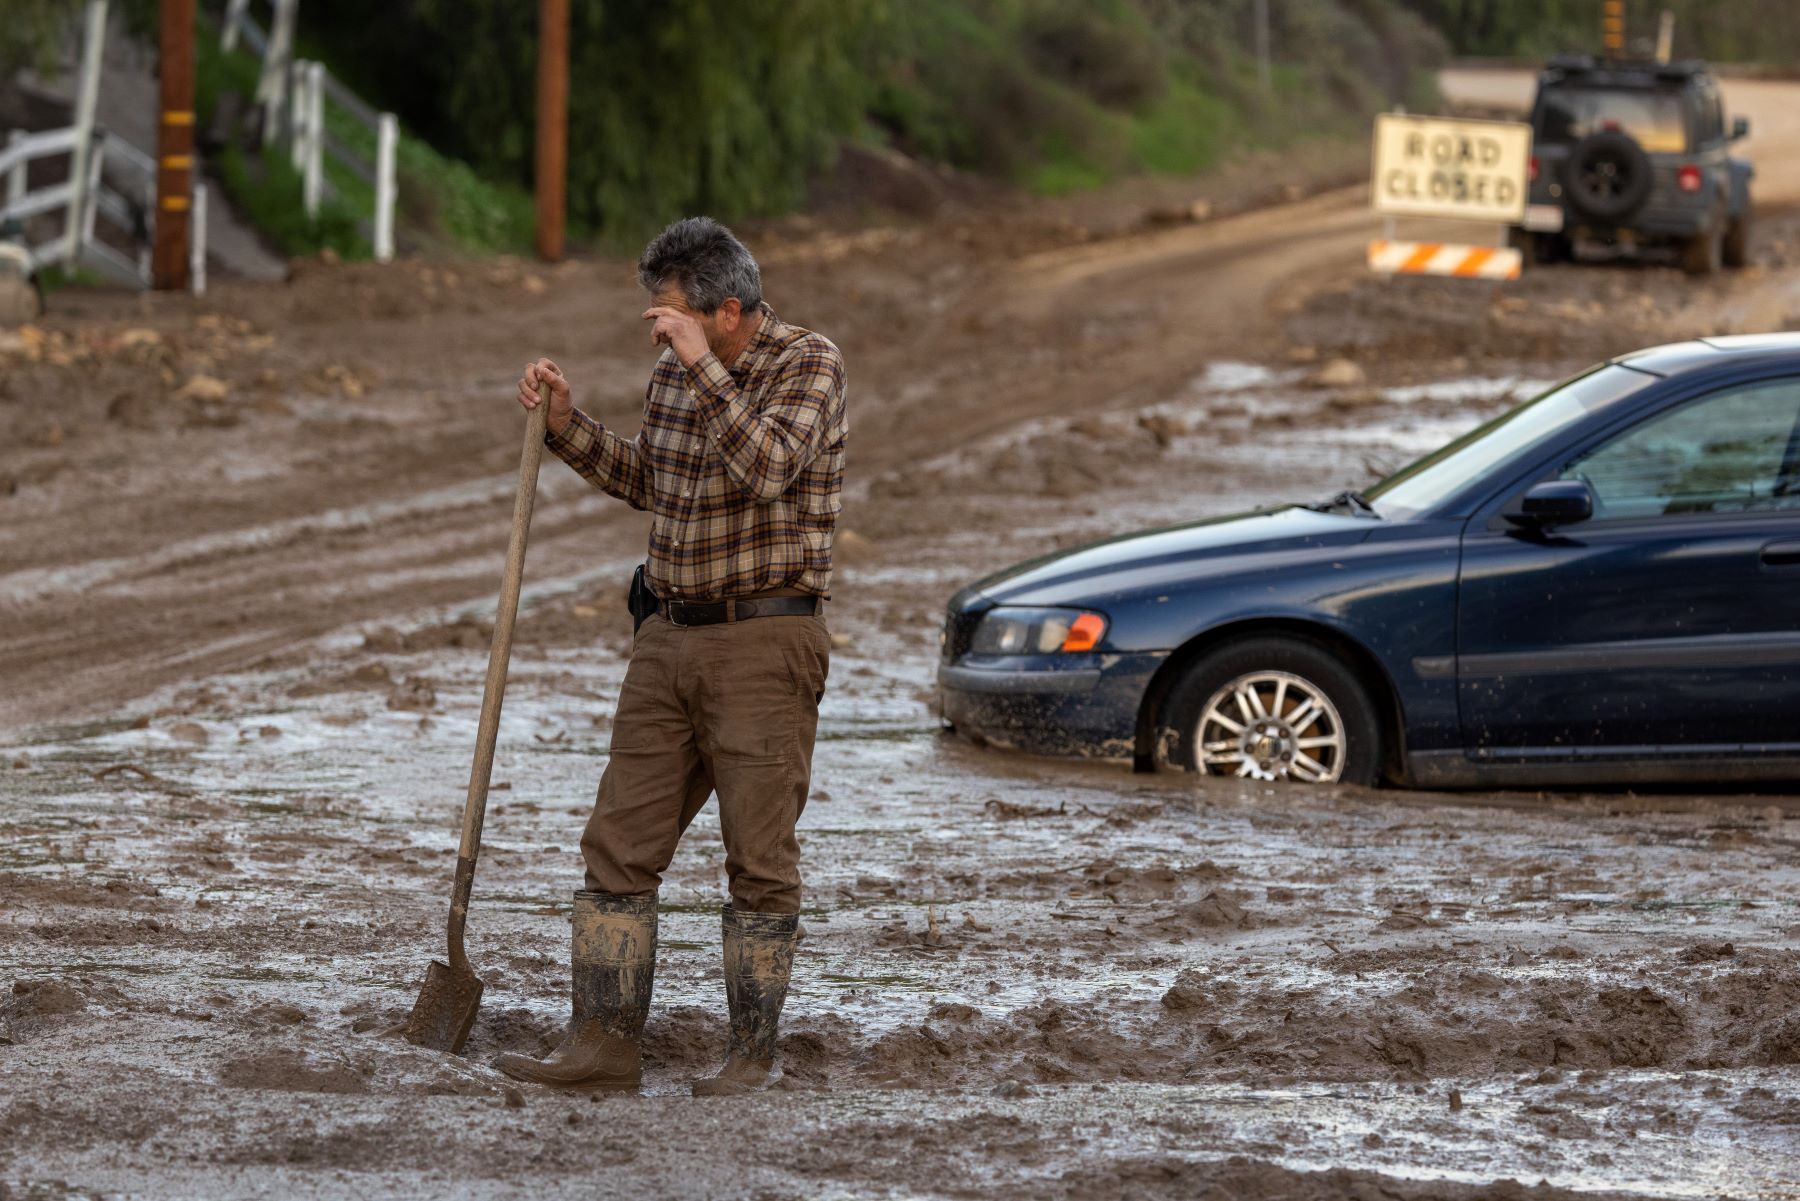 Cars stuck in wet mud after flooding in the town of Piru, near Fillmore, California